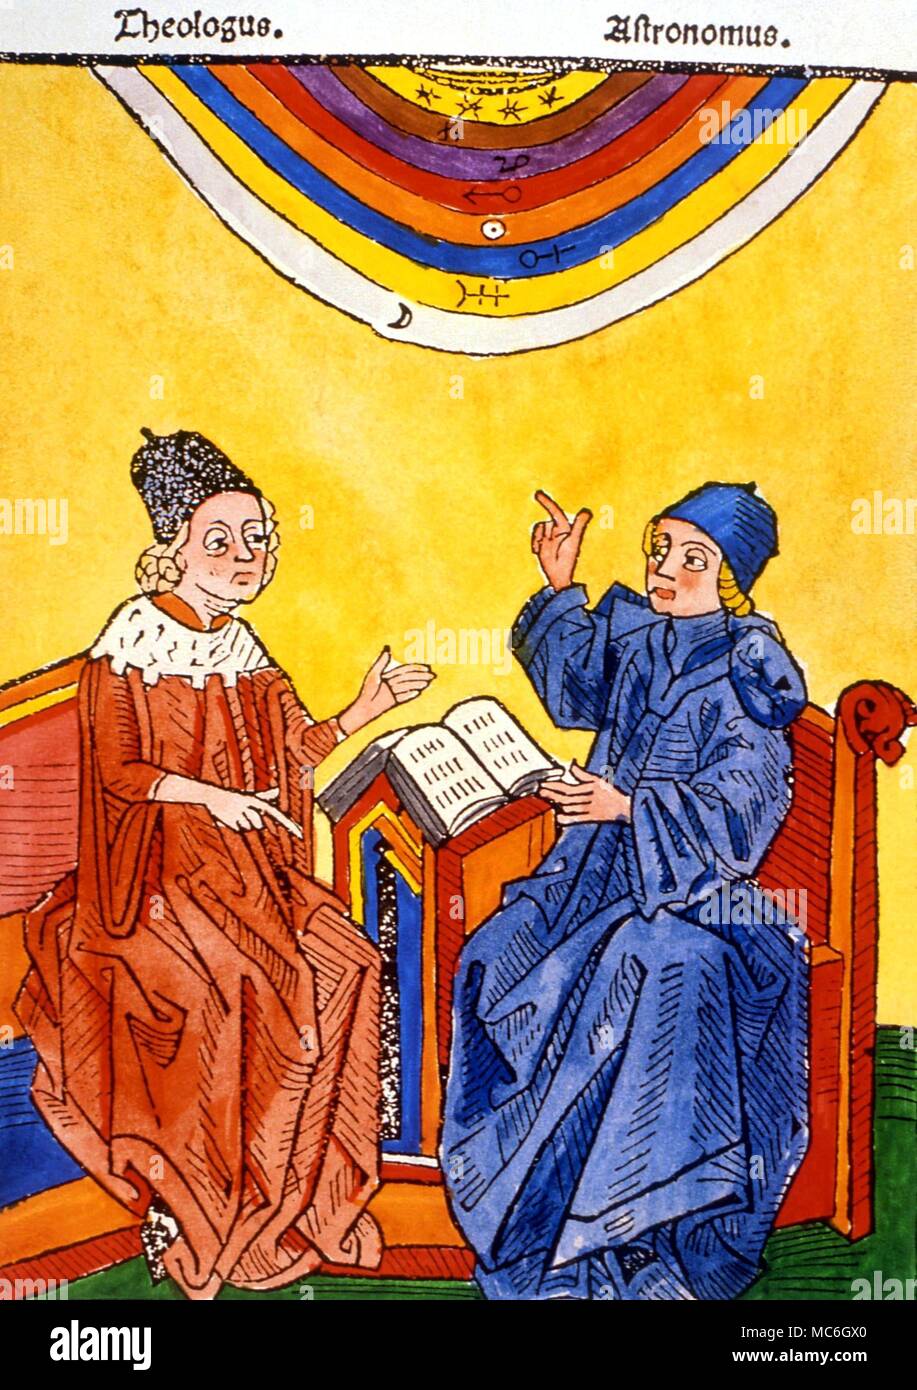 ASTROLOGY - Woodcut showing Theology and Astrologia disputing concerning the wisdom of the stars. After a print from Peter d'Abano's book of astrology and planetary cycles Stock Photo